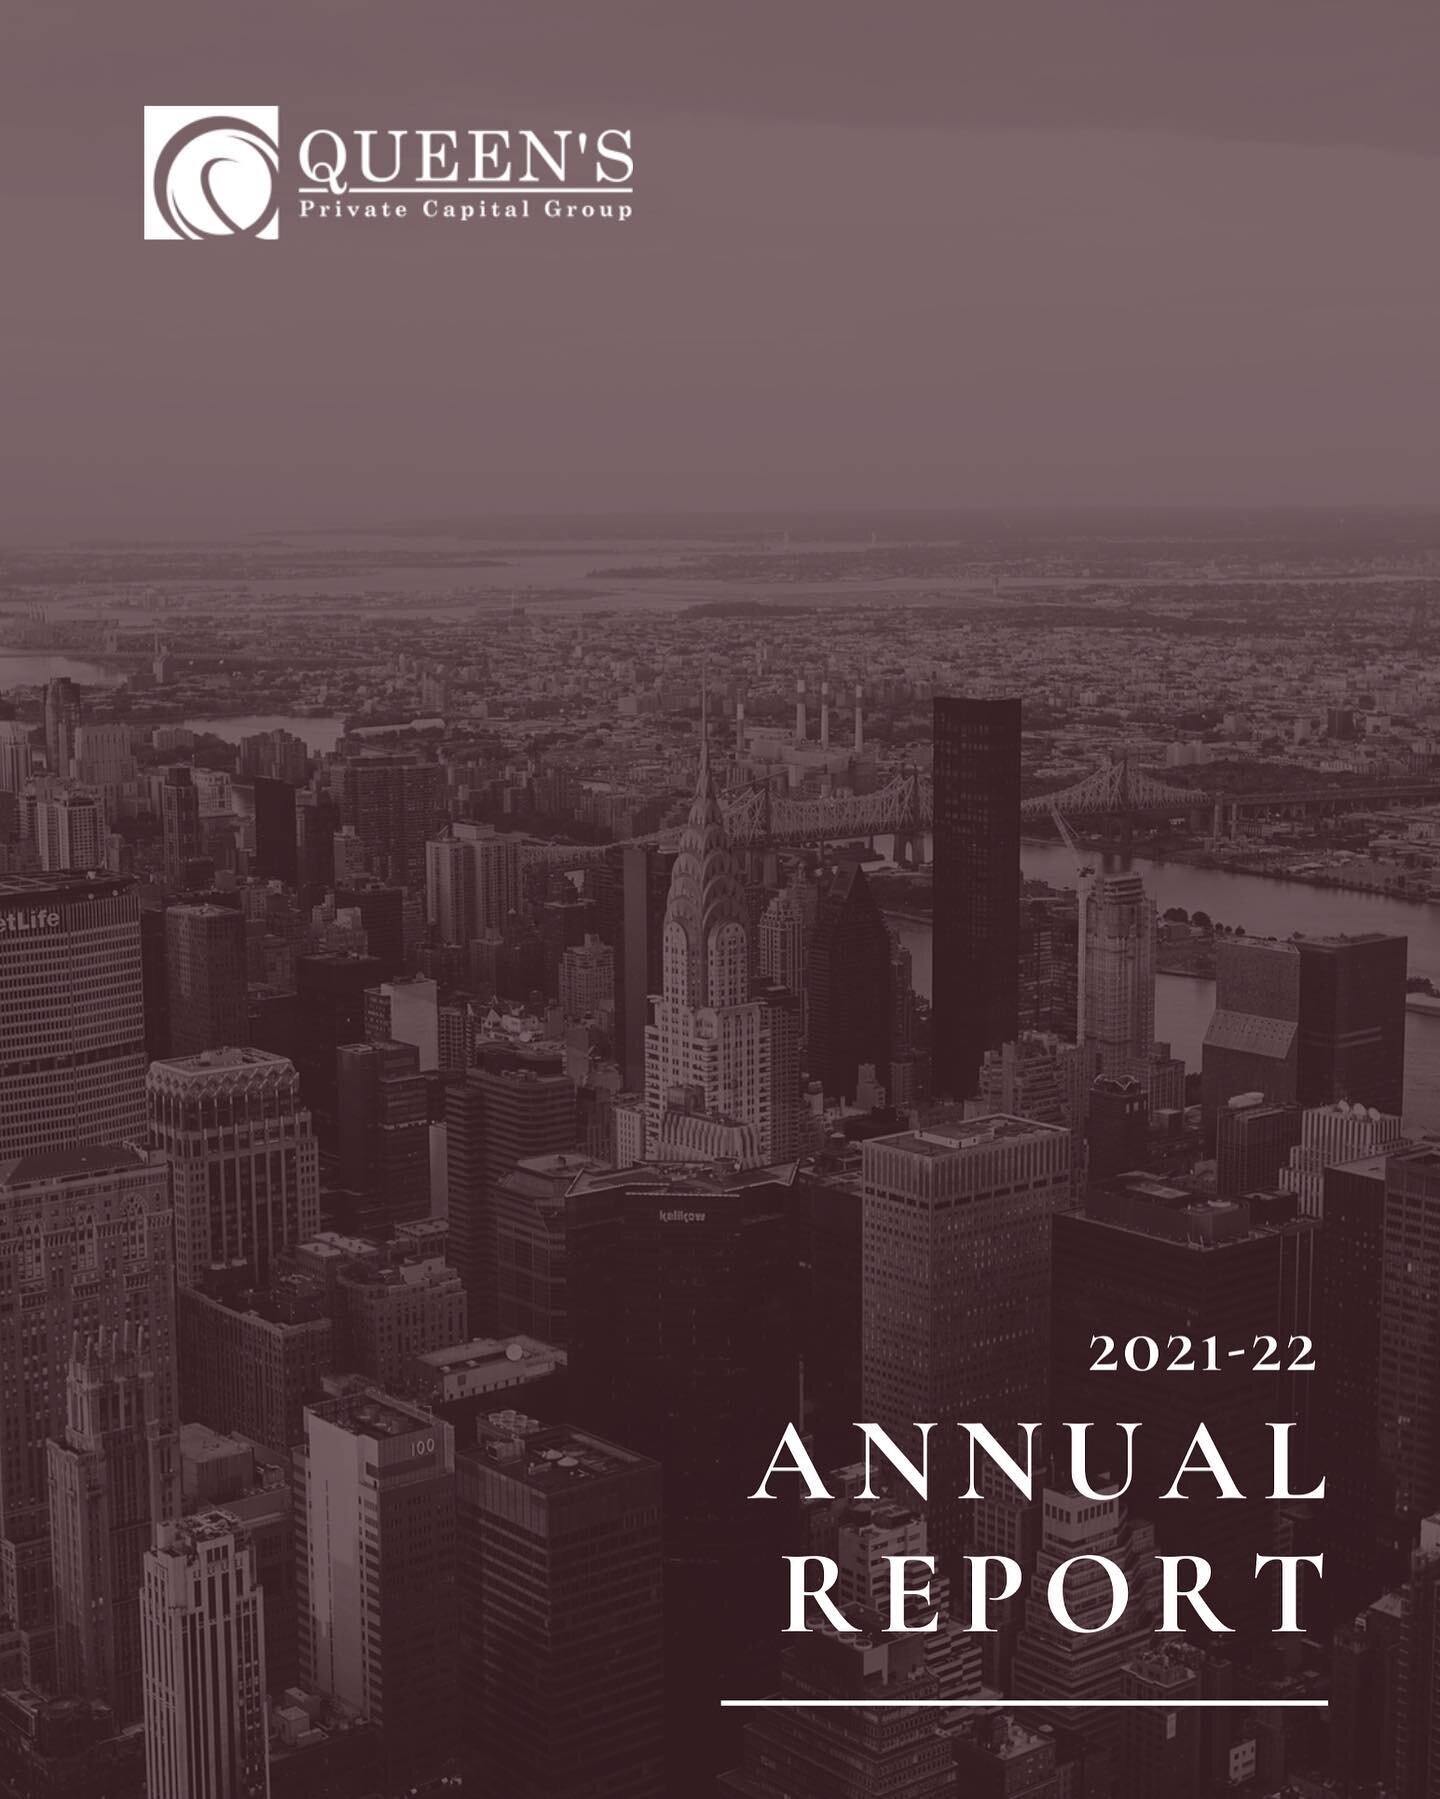 The Agency had the wonderful opportunity to work with @queensprivatecapital to help build their 2021-2022 Annual Report! Visit our bio to view the annual report! 📄

The Agency provides photography, videography, and graphic design services to organiz